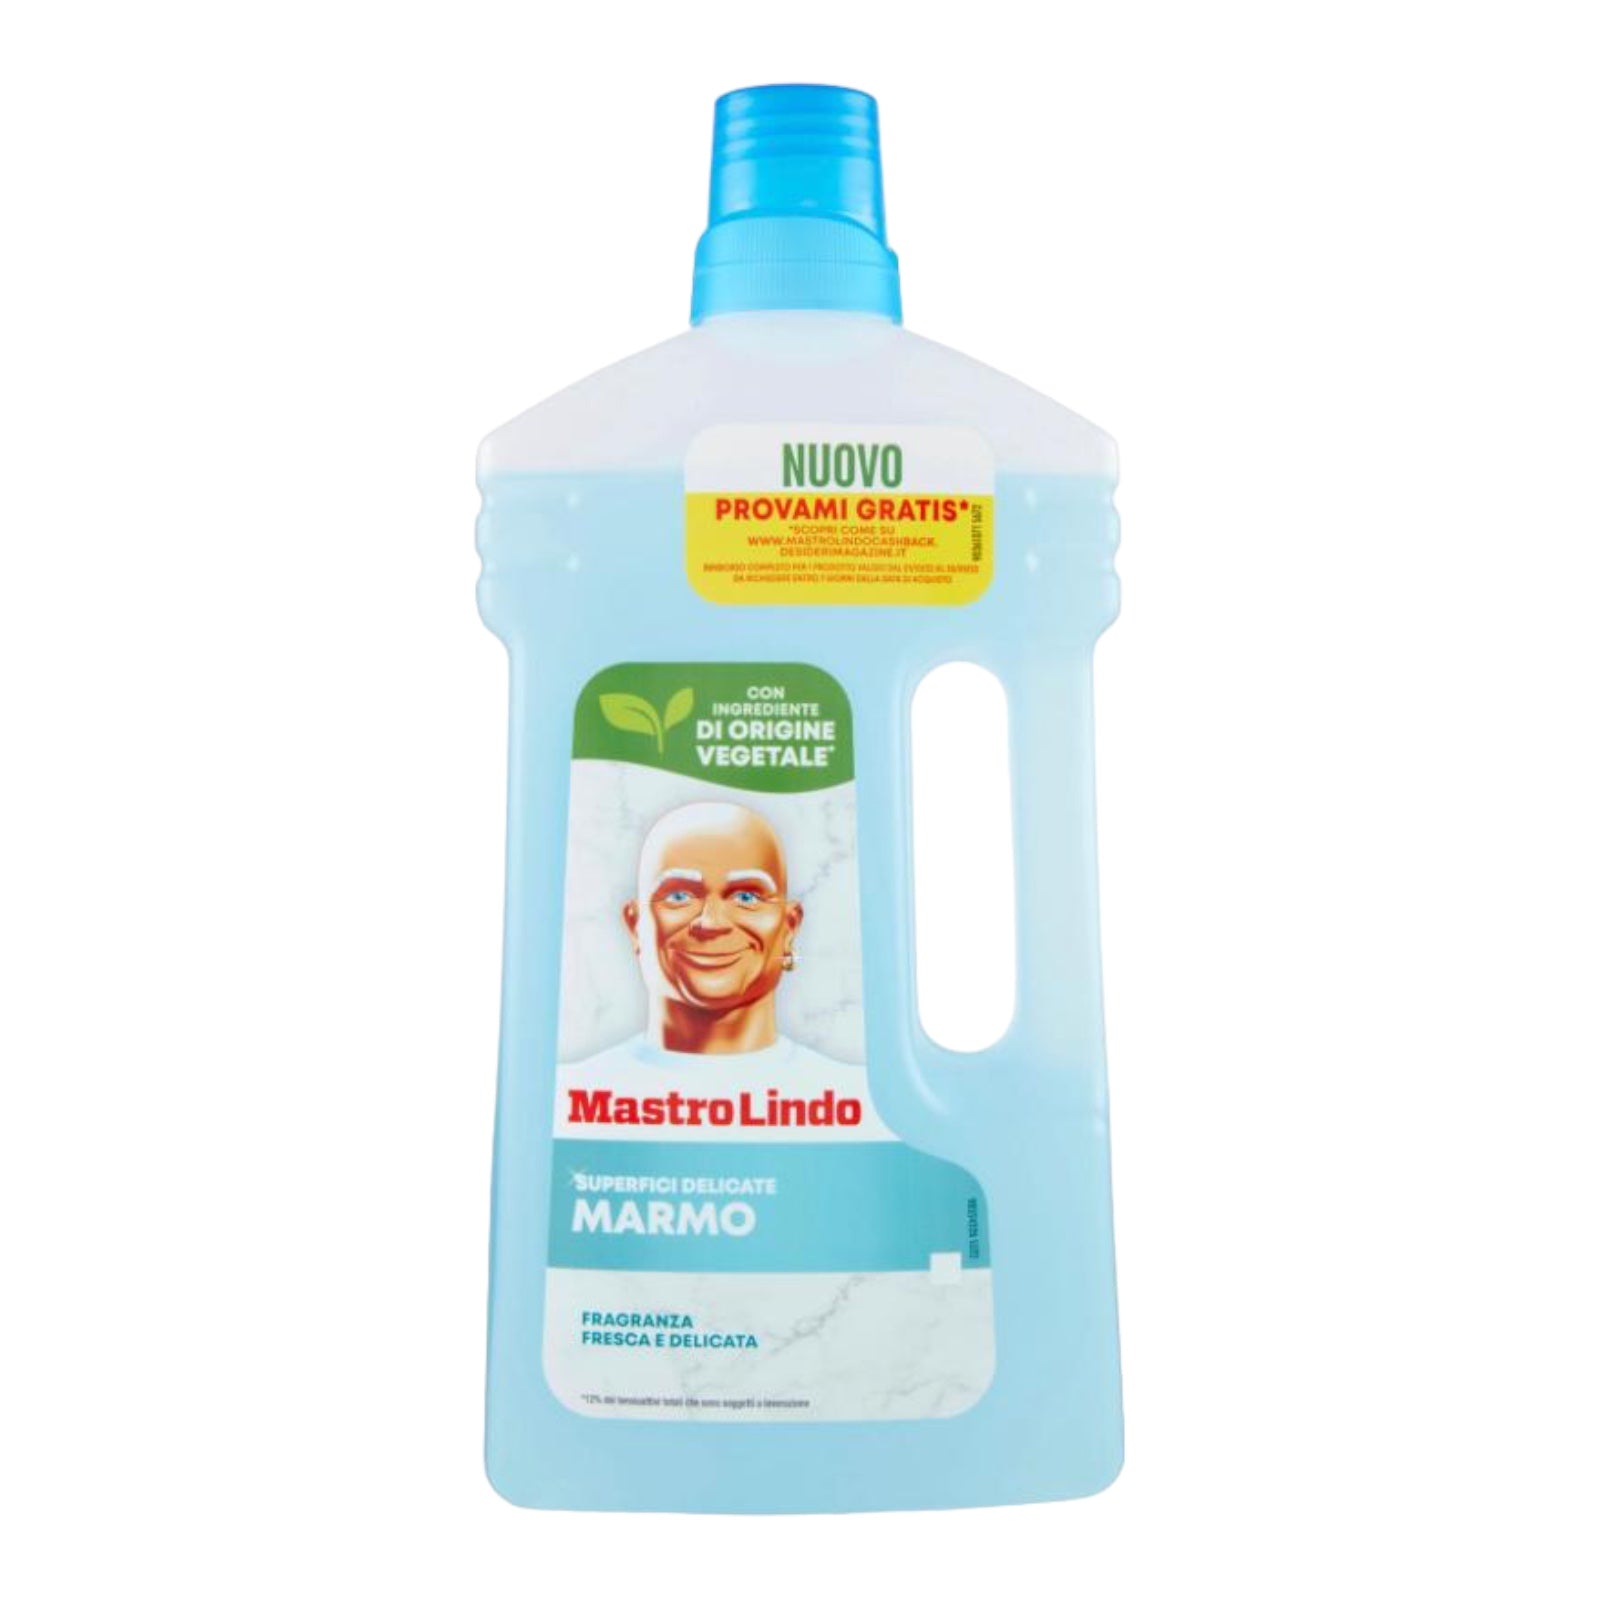 Mastro Lindo Delicate Cleaner 
Marble Surfaces 930 ml